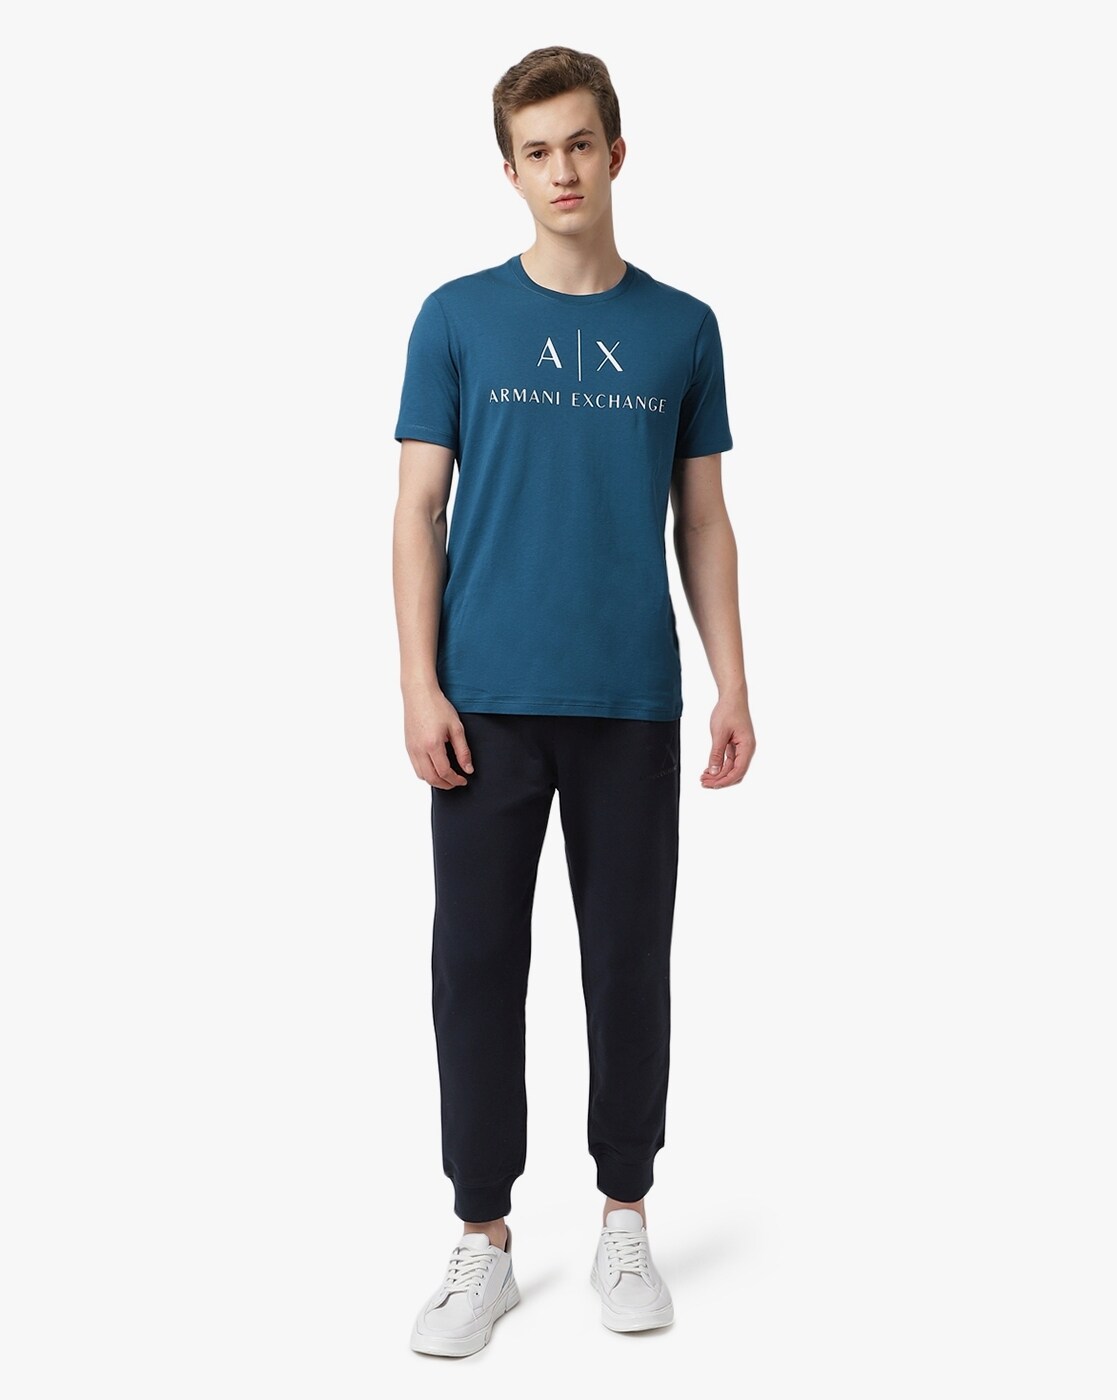 A|X Armani Exchange Men's Limited Edition Milano Trousers - Macy's